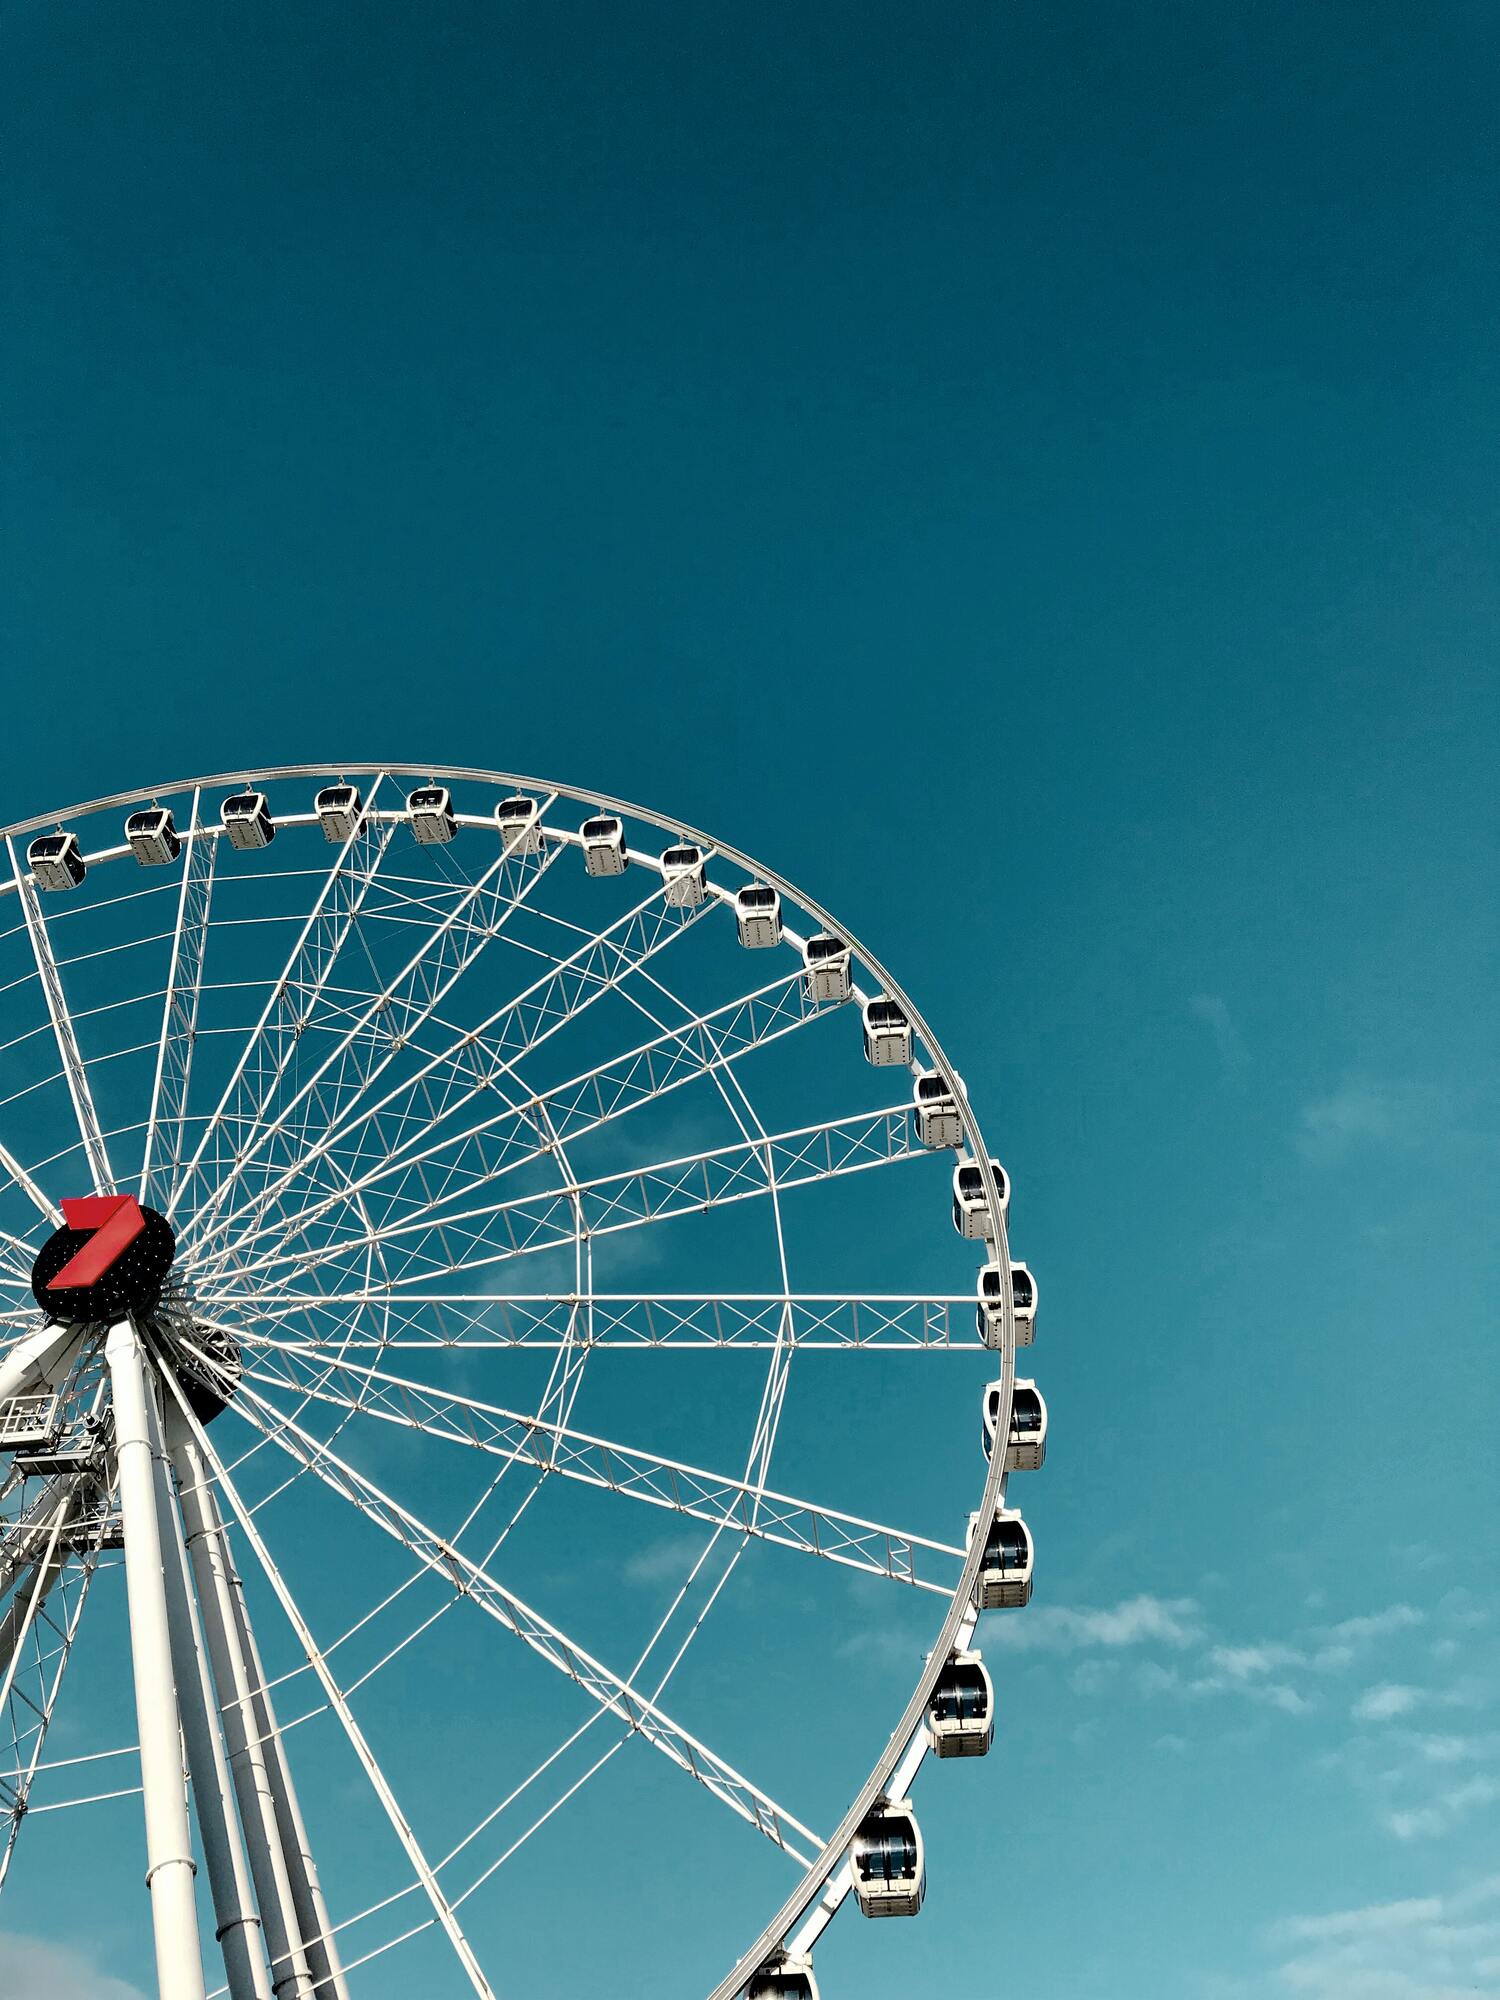 <p>The Ferris wheel in Brisbane, the capital of Queensland, is the best way to get a panoramic view of the city. It's 60 meters (179 feet) high. Like the London Eye in the British capital, it is one of the most touristic places.</p> <p>Photo: Matheus Fradeon / Unsplash</p>